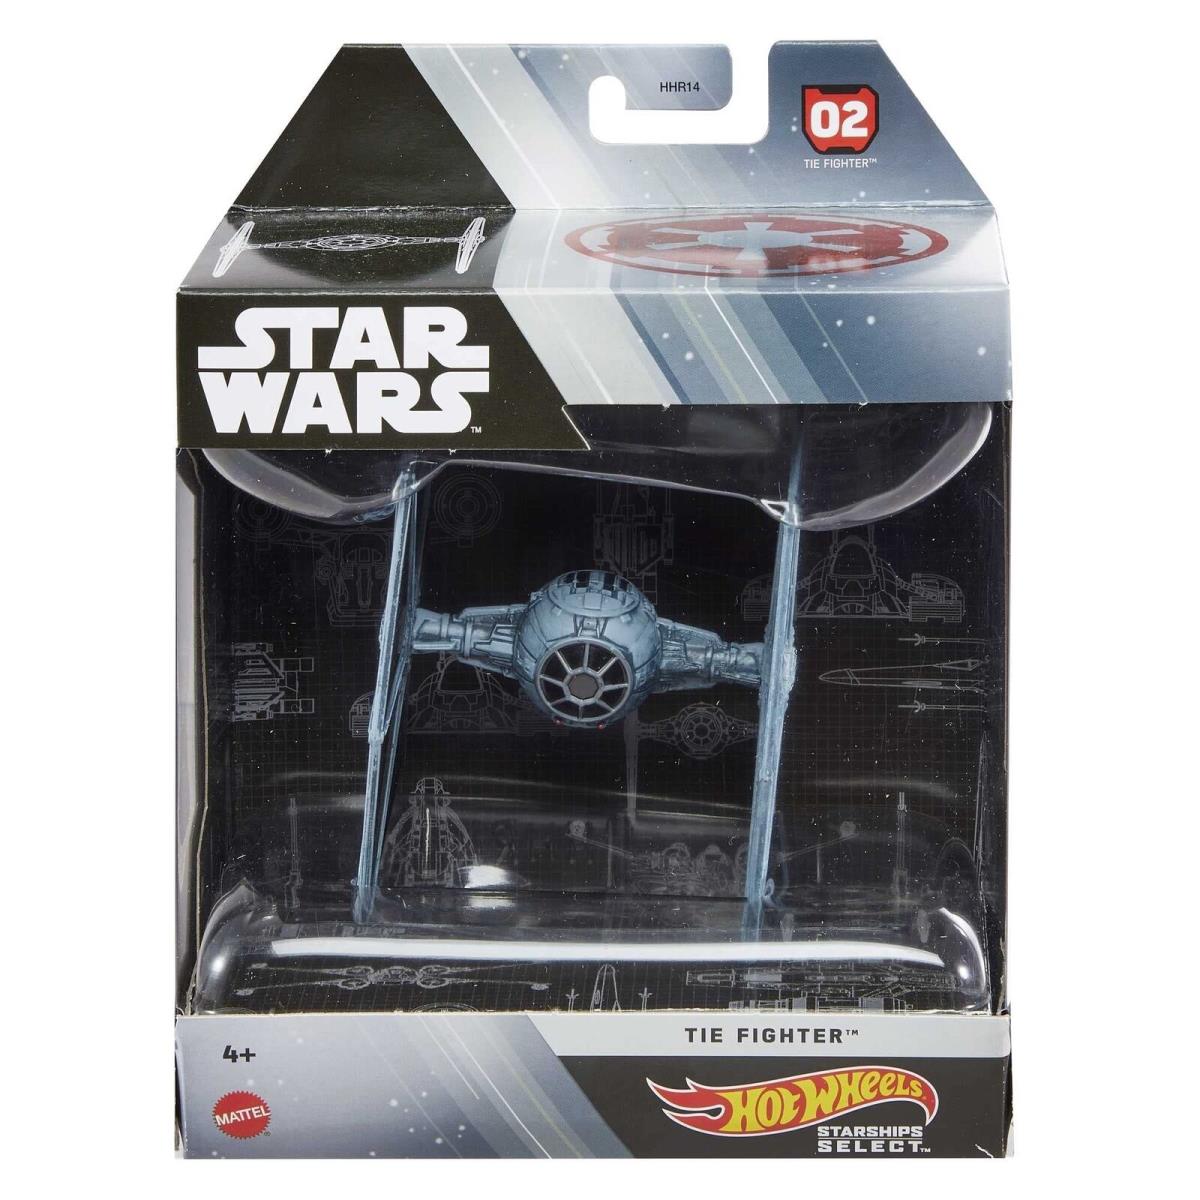 Hot Wheels Star Wars Starships Select Premium Gift For Adults